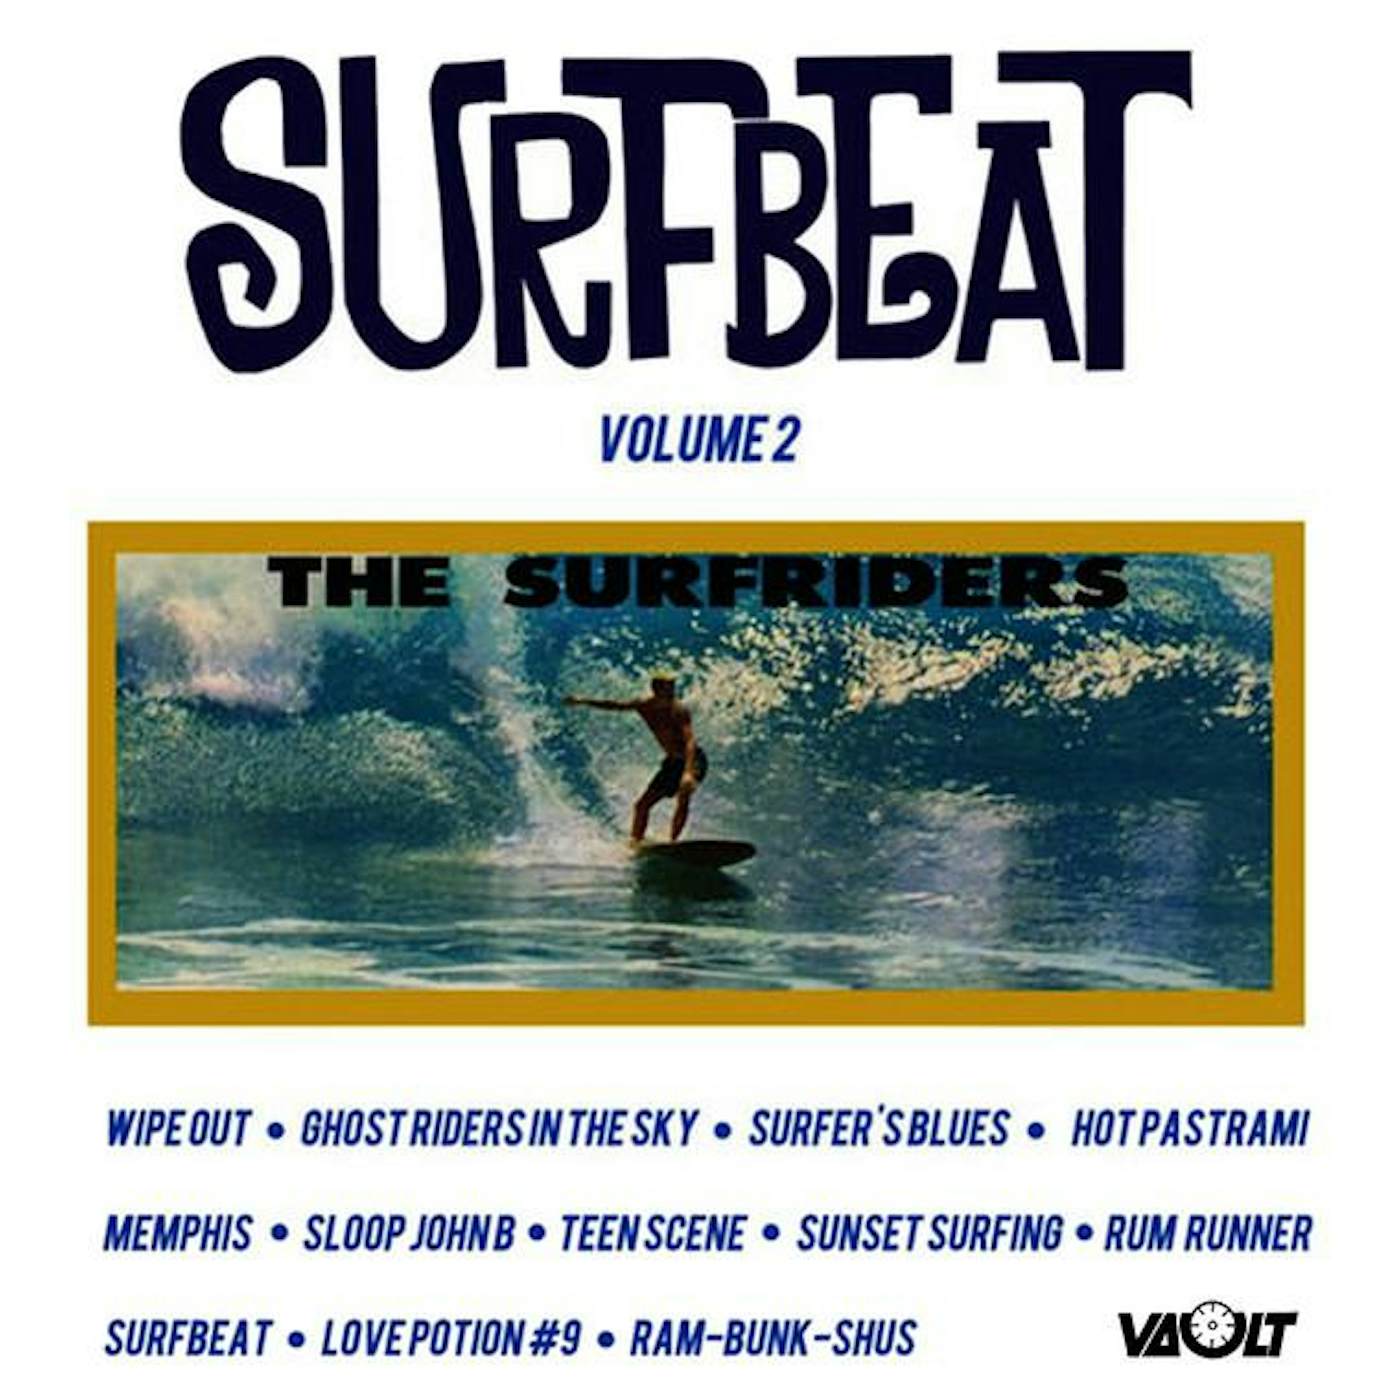 The Surfriders